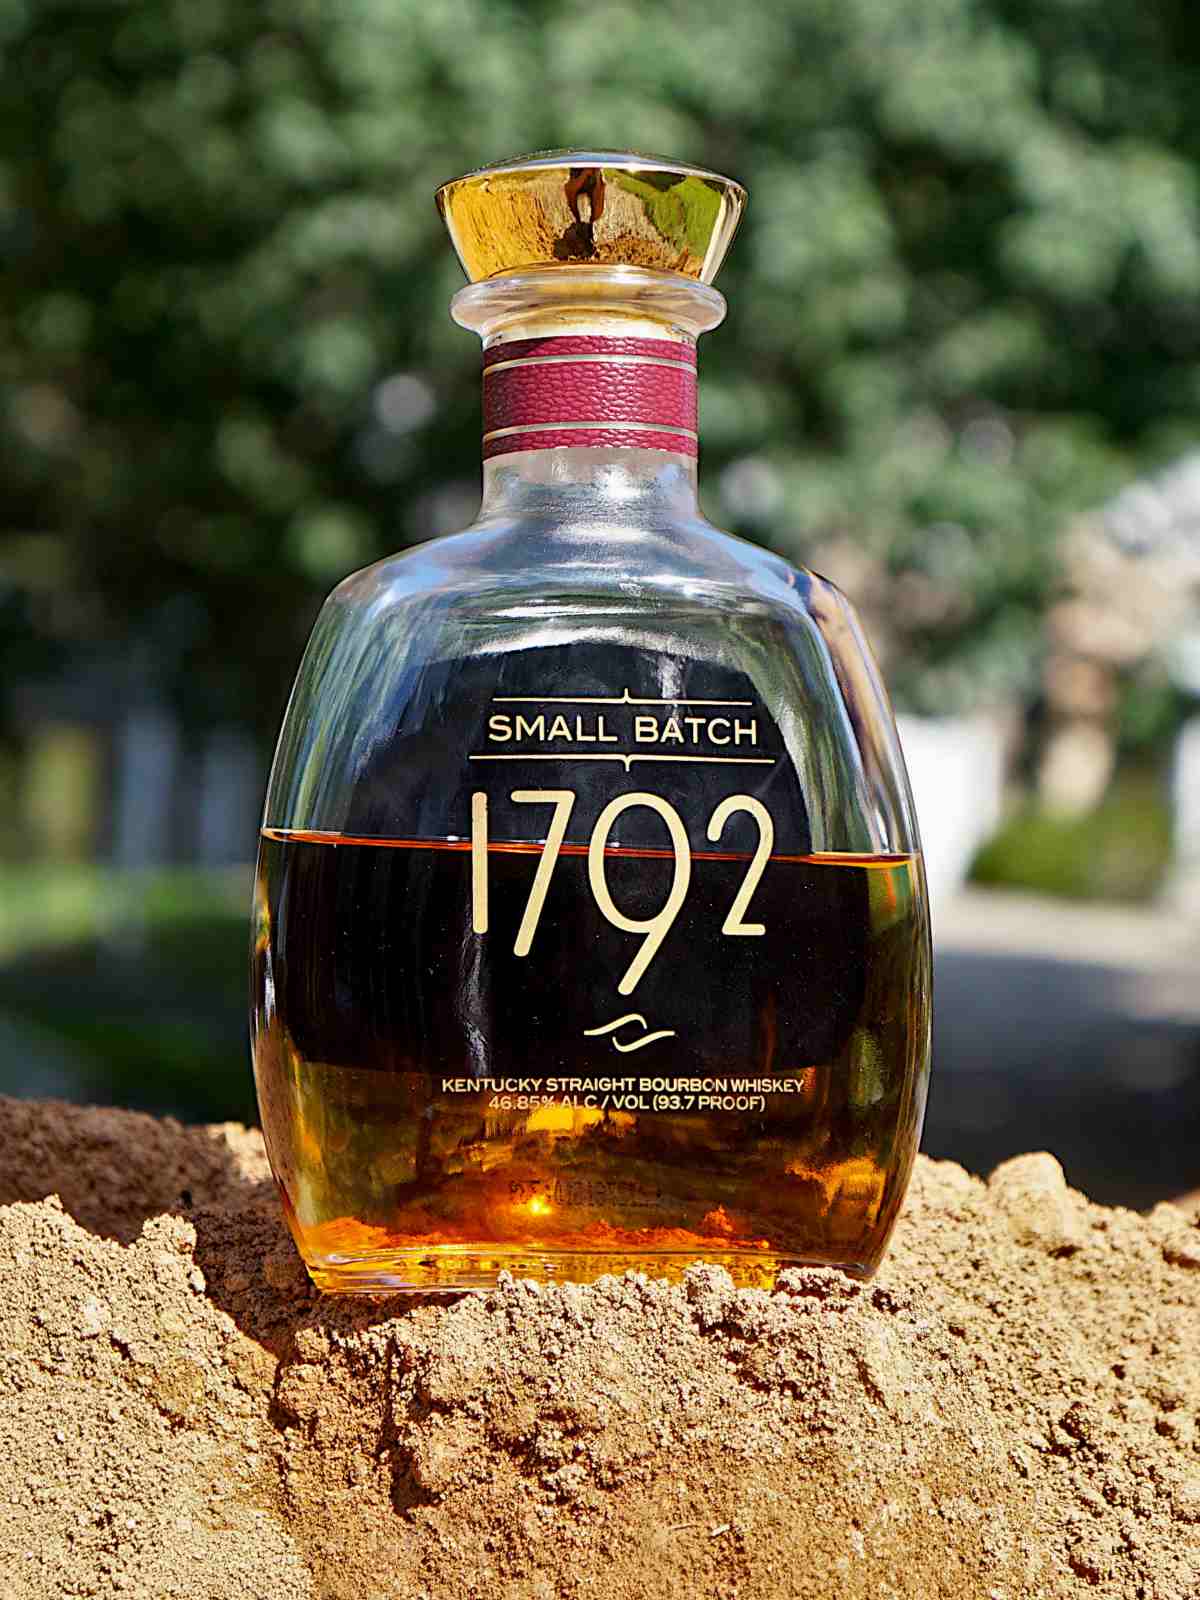 1792 small batch featured